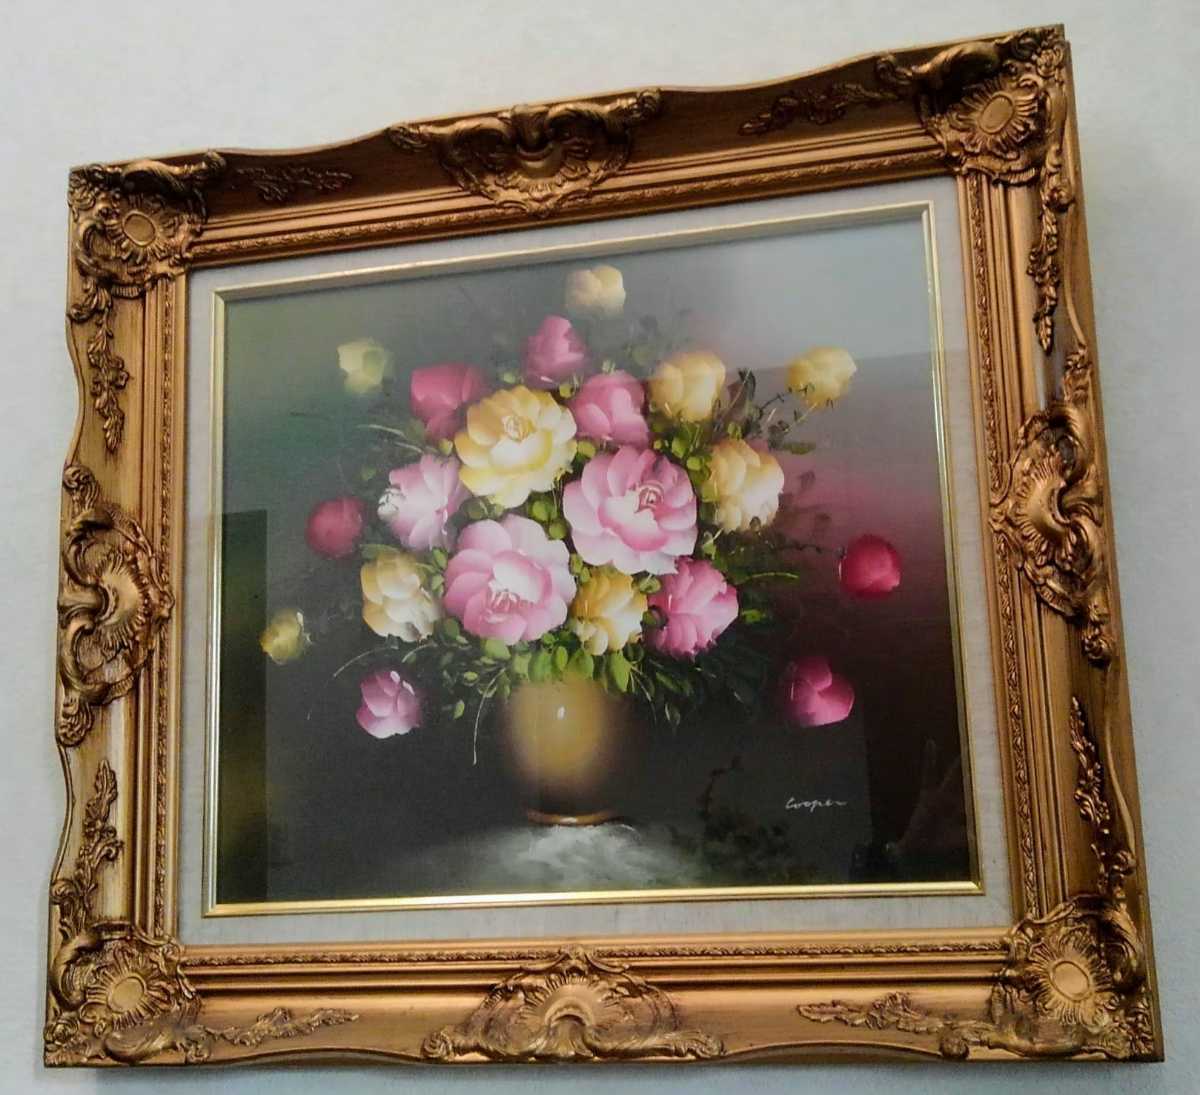 ⑤Treasure, rare, expensive, period item, masterpiece, painting, rose, oil painting, masterpiece, second-hand, vintage, antique, one-of-a-kind, art/inspection, Picasso, Van Gogh, Monet, Da Vinci, Painting, Oil painting, Nature, Landscape painting